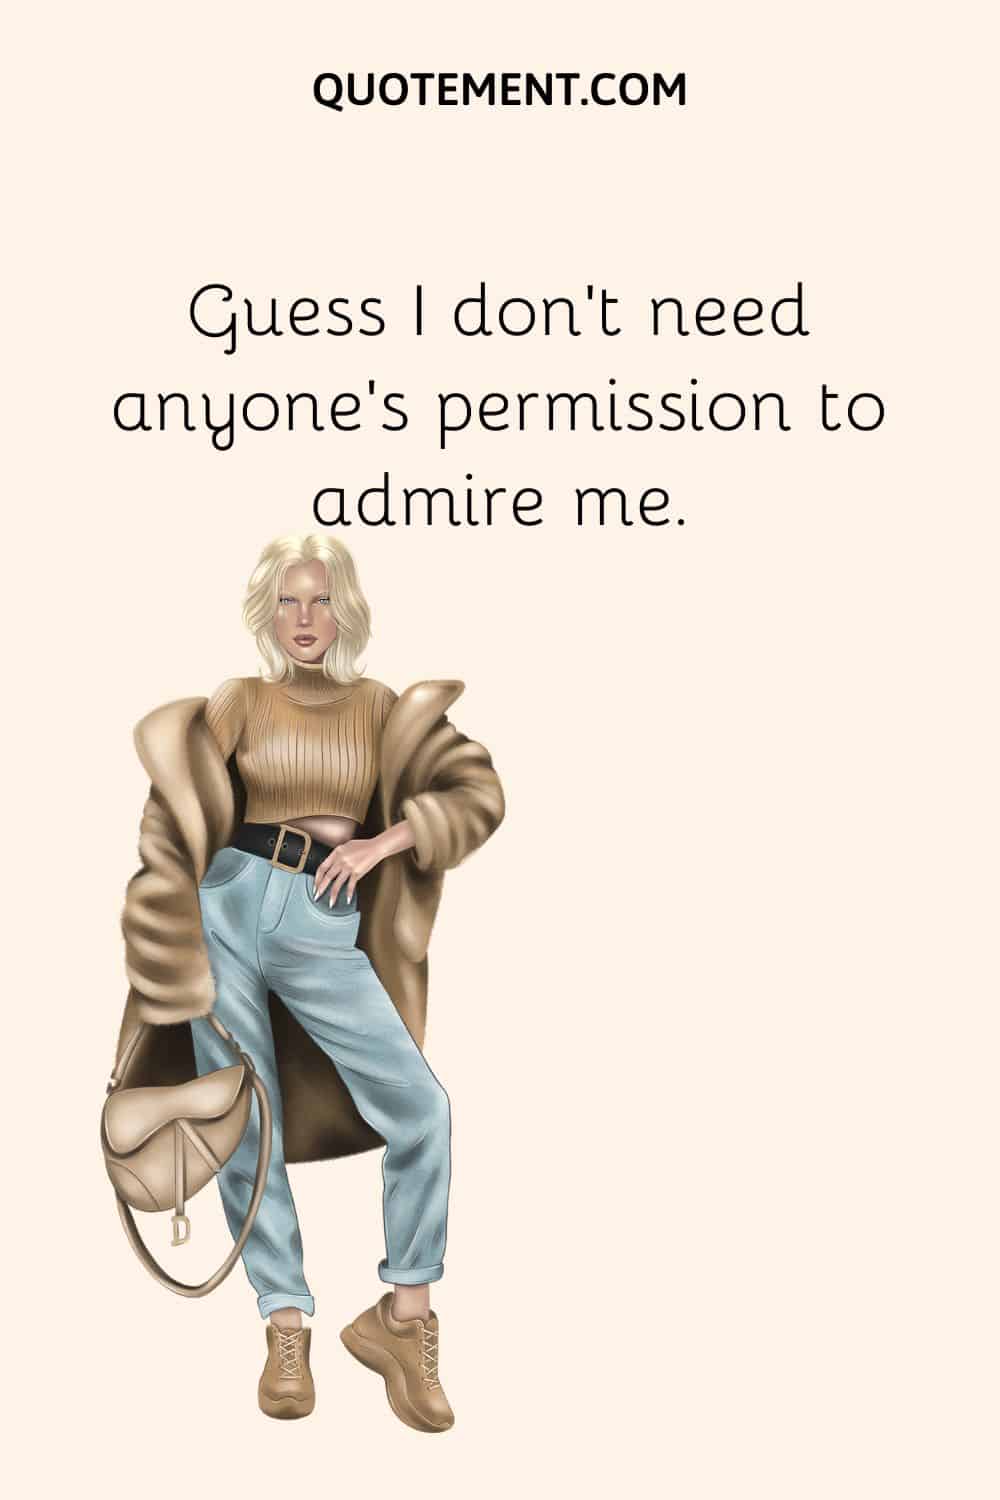 Guess I don’t need anyone’s permission to admire me